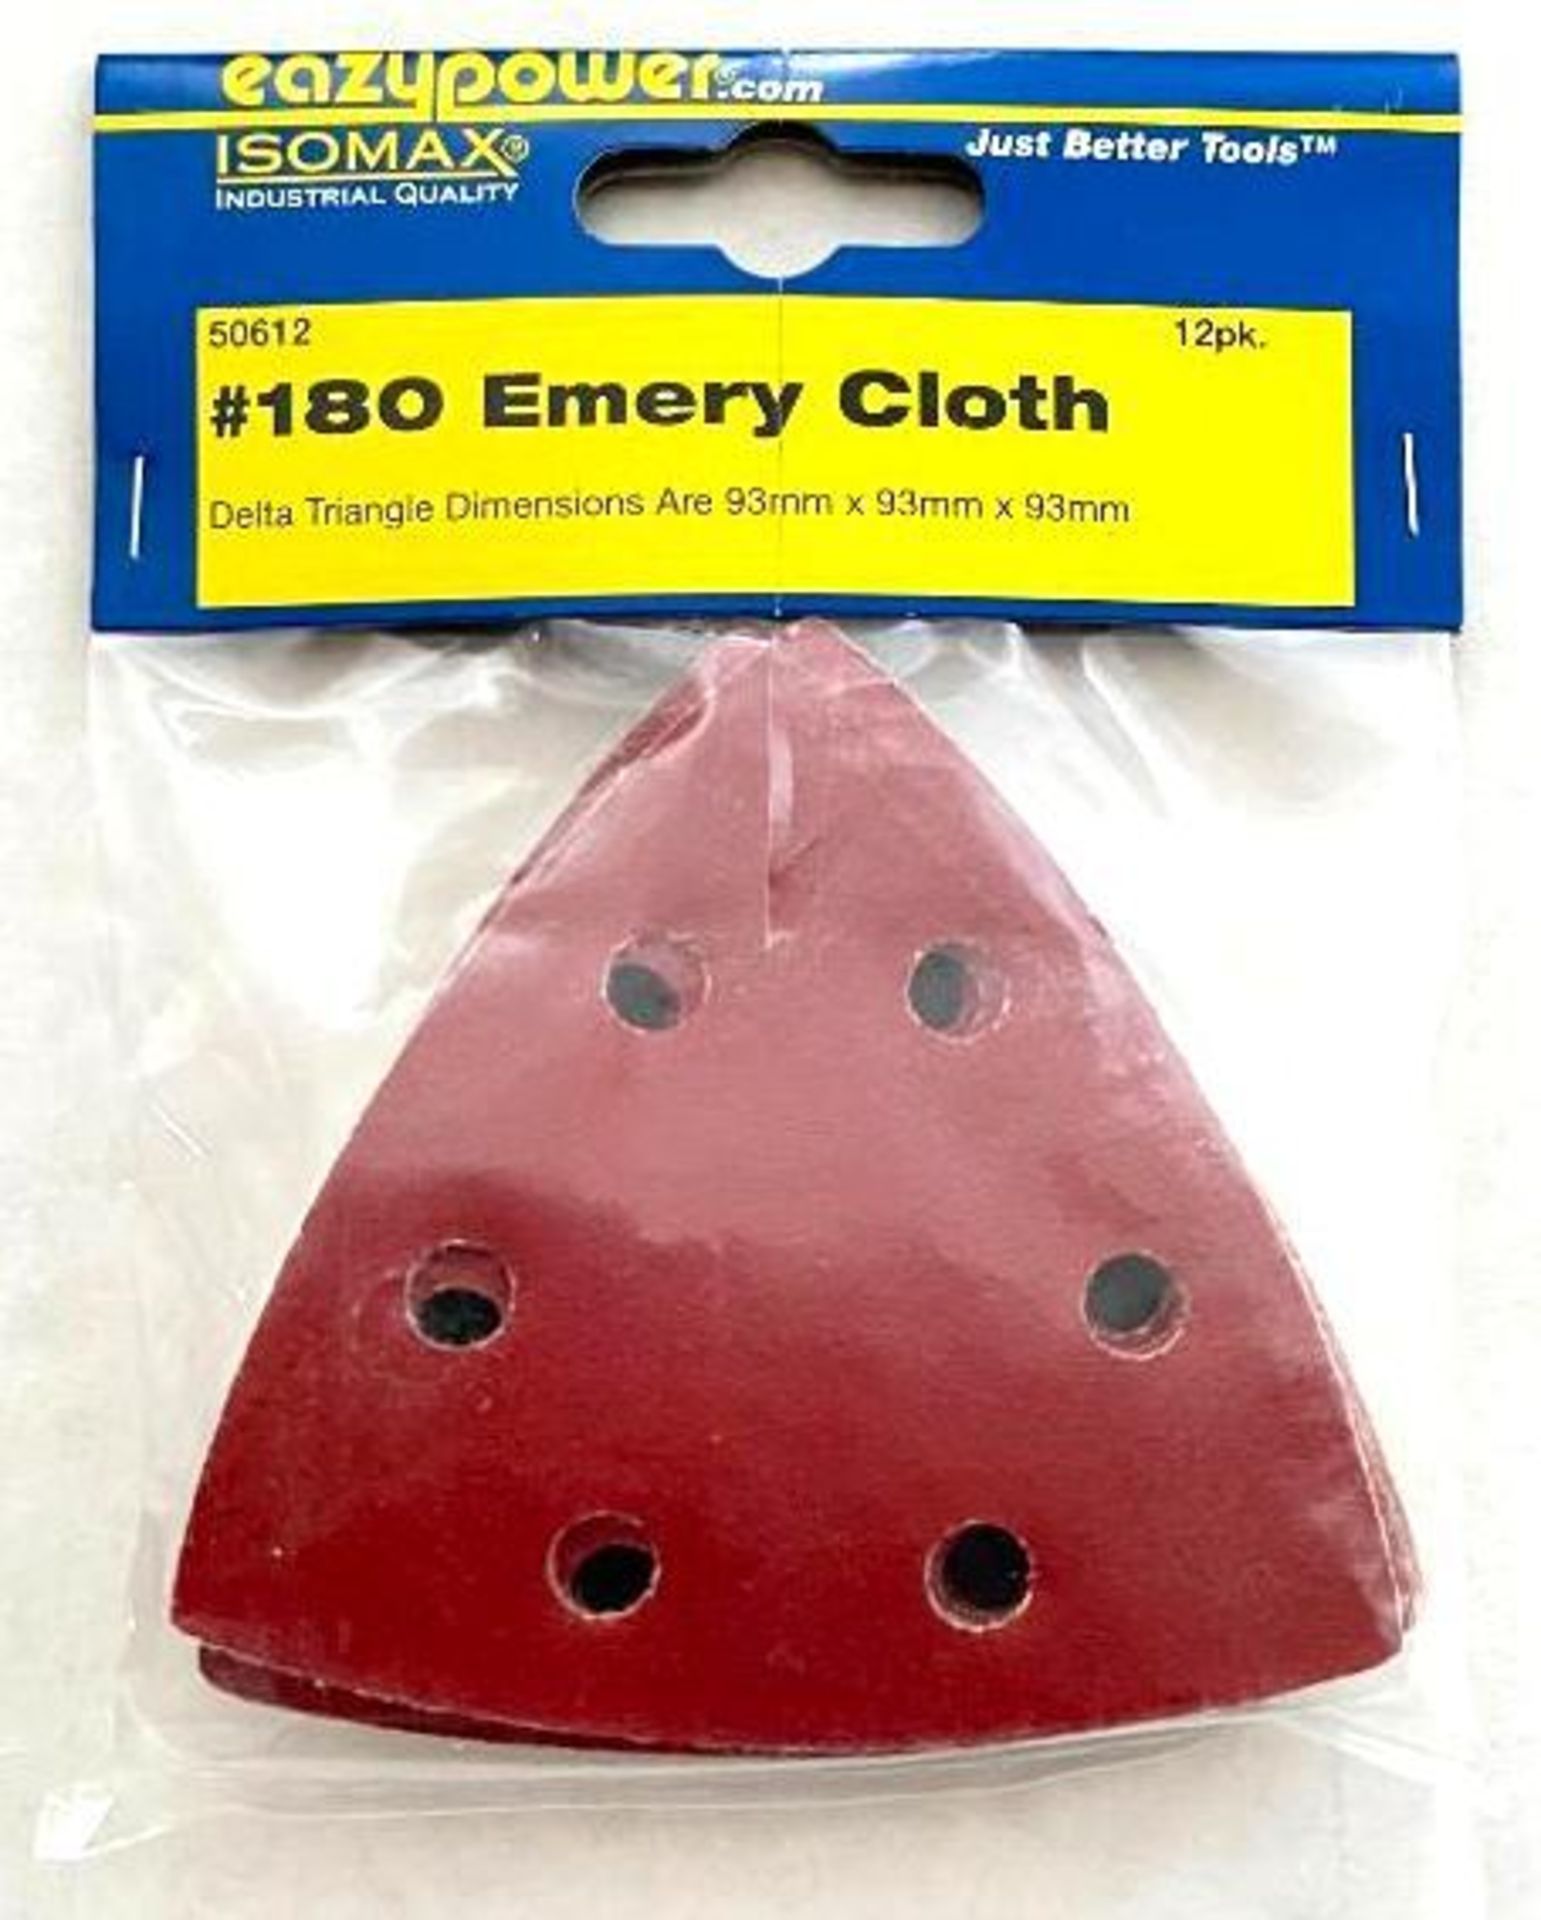 (300) 12PC PACKS OF 180 GRIT 3-5/8" EMERY SANDING CLOTH BRAND/MODEL EAZYPOWER 50612 ADDITIONAL INFO